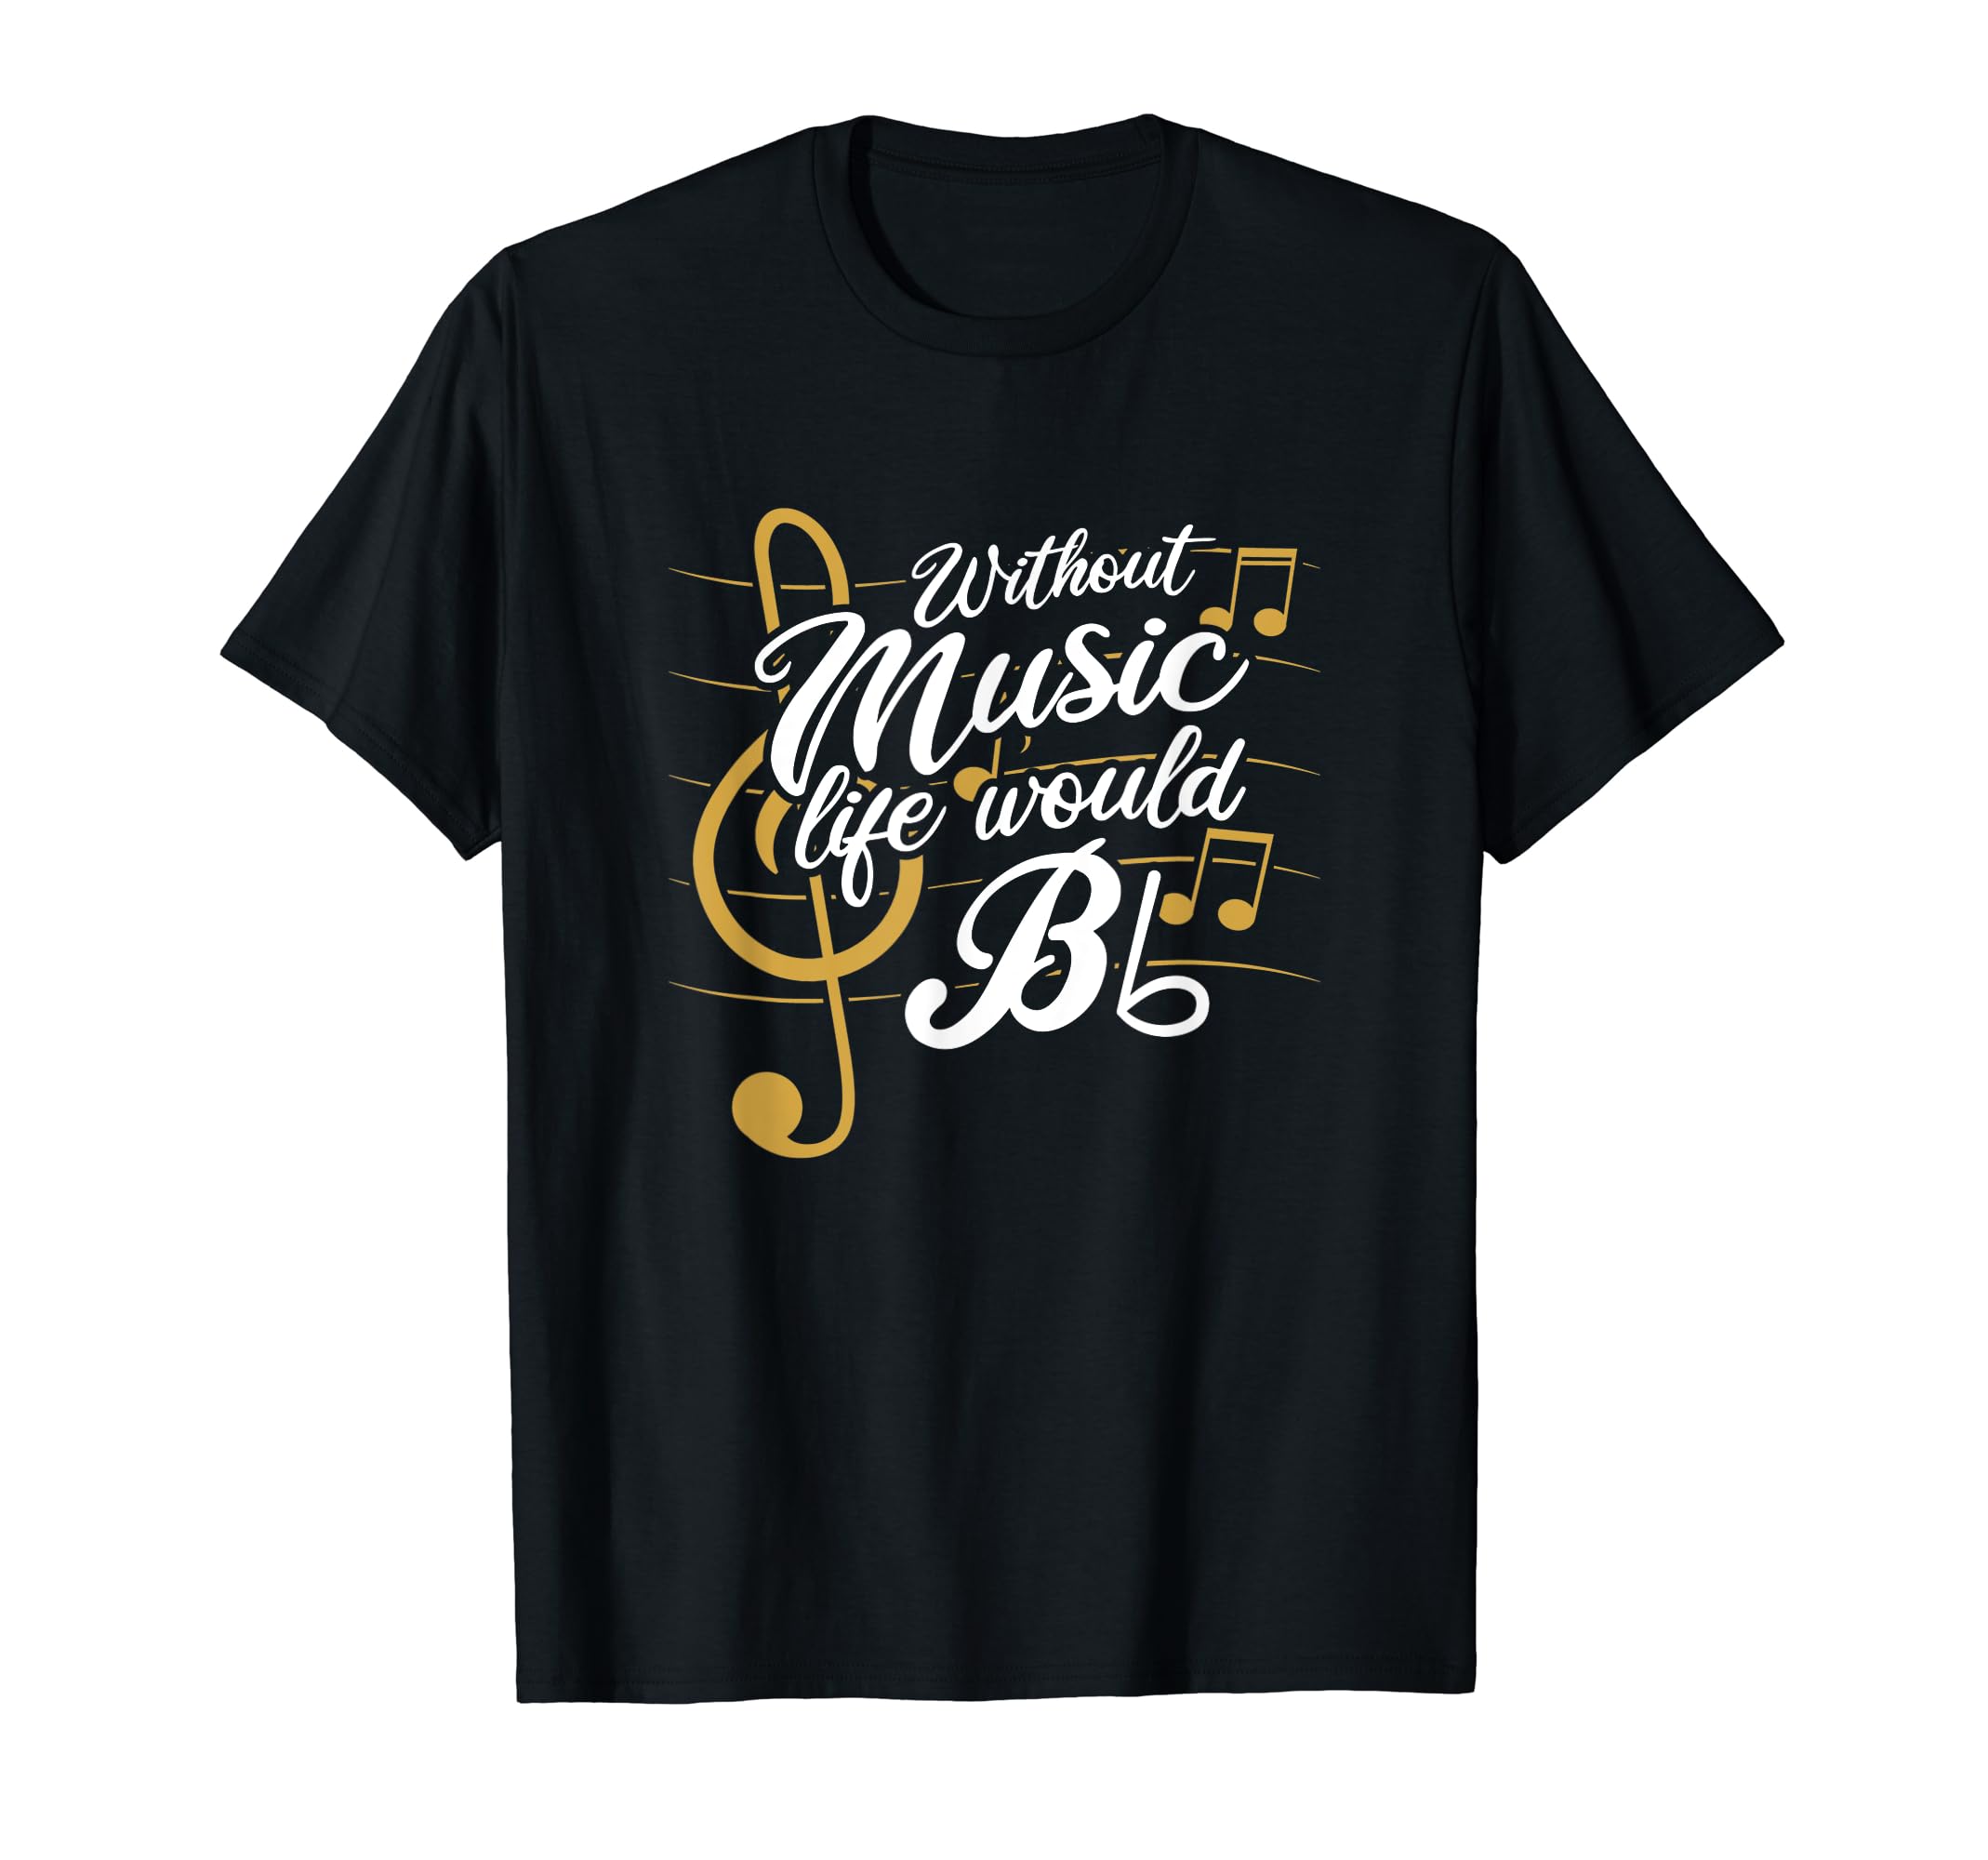 Without Music Life Would B Flat II - Funny Music Quotes T-Shirt